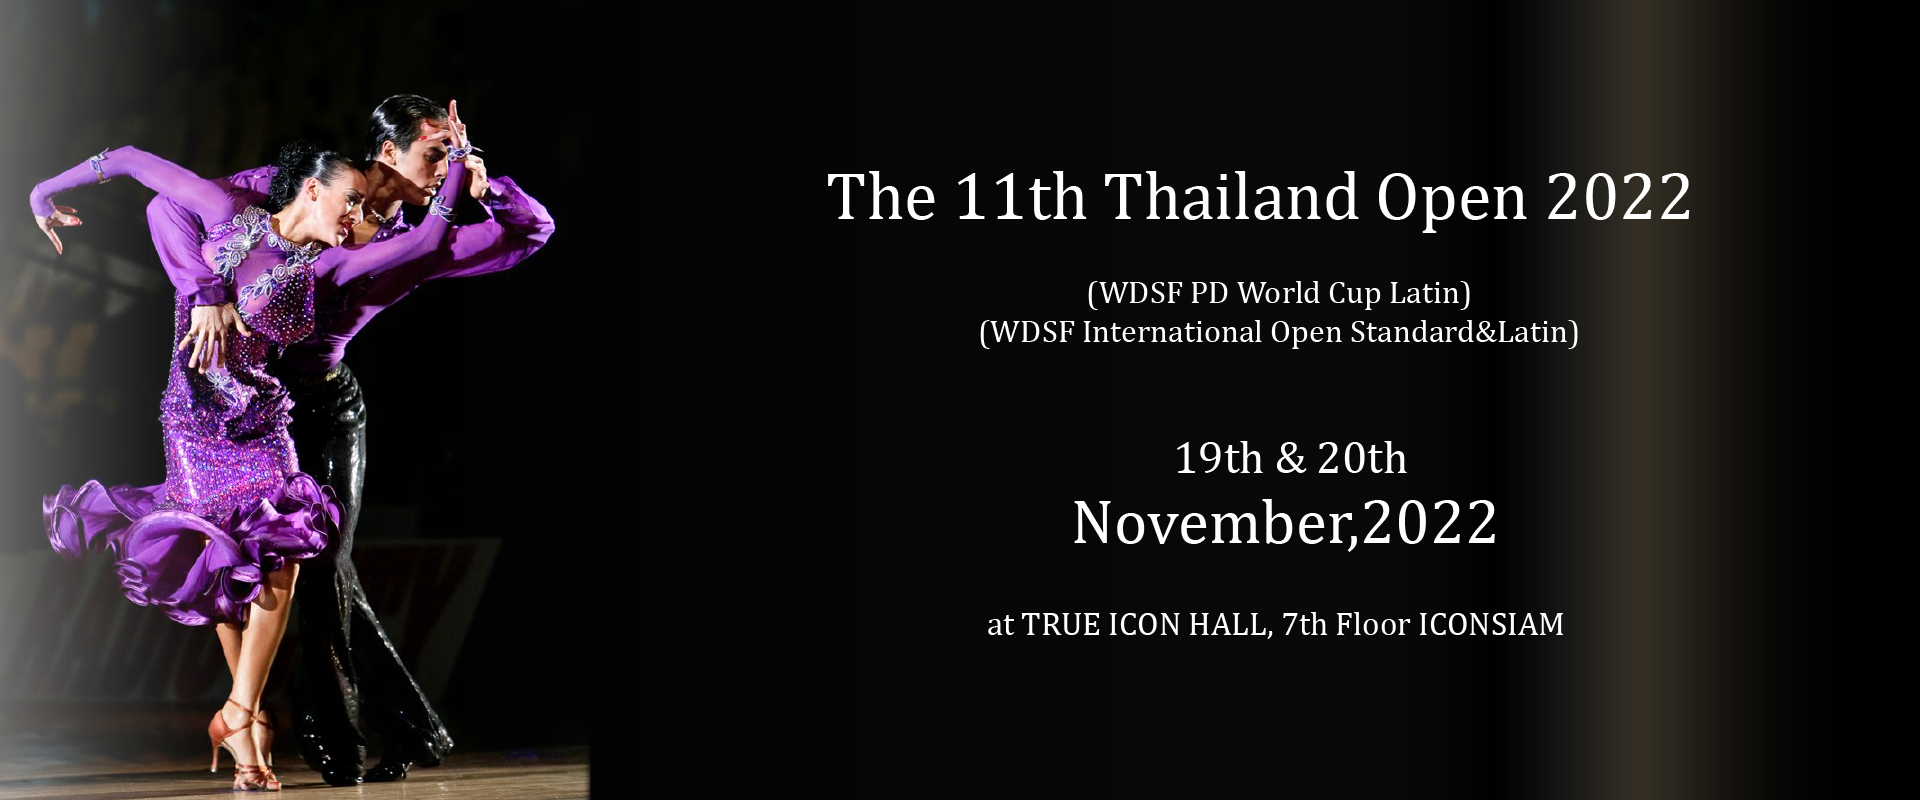 The 11th Thailand Open 2022